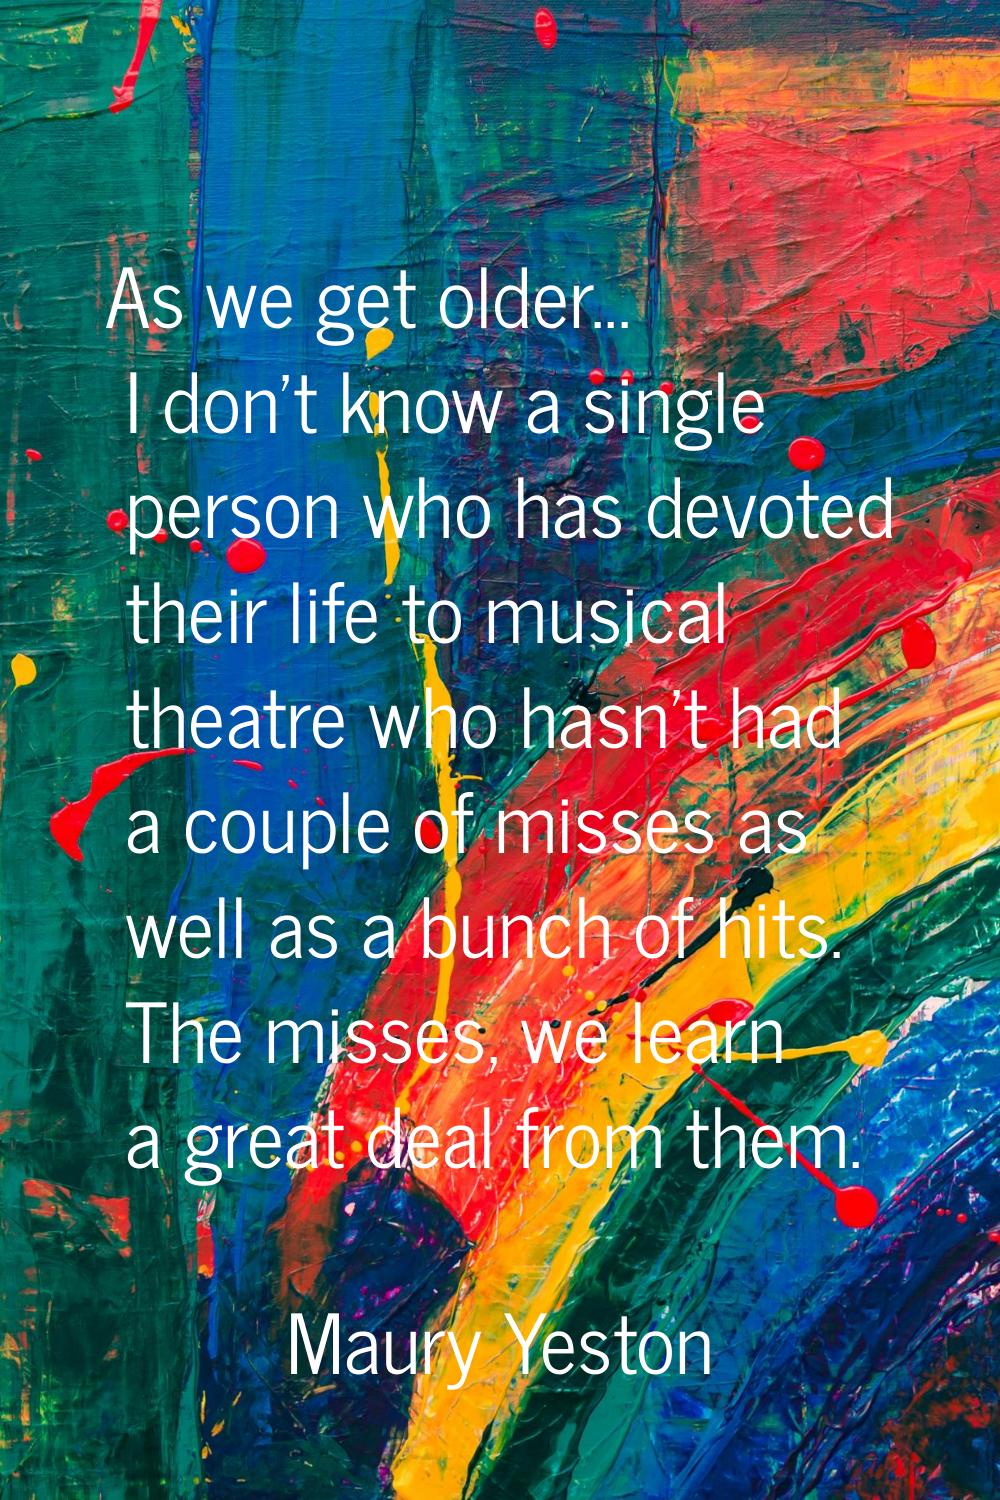 As we get older... I don't know a single person who has devoted their life to musical theatre who h